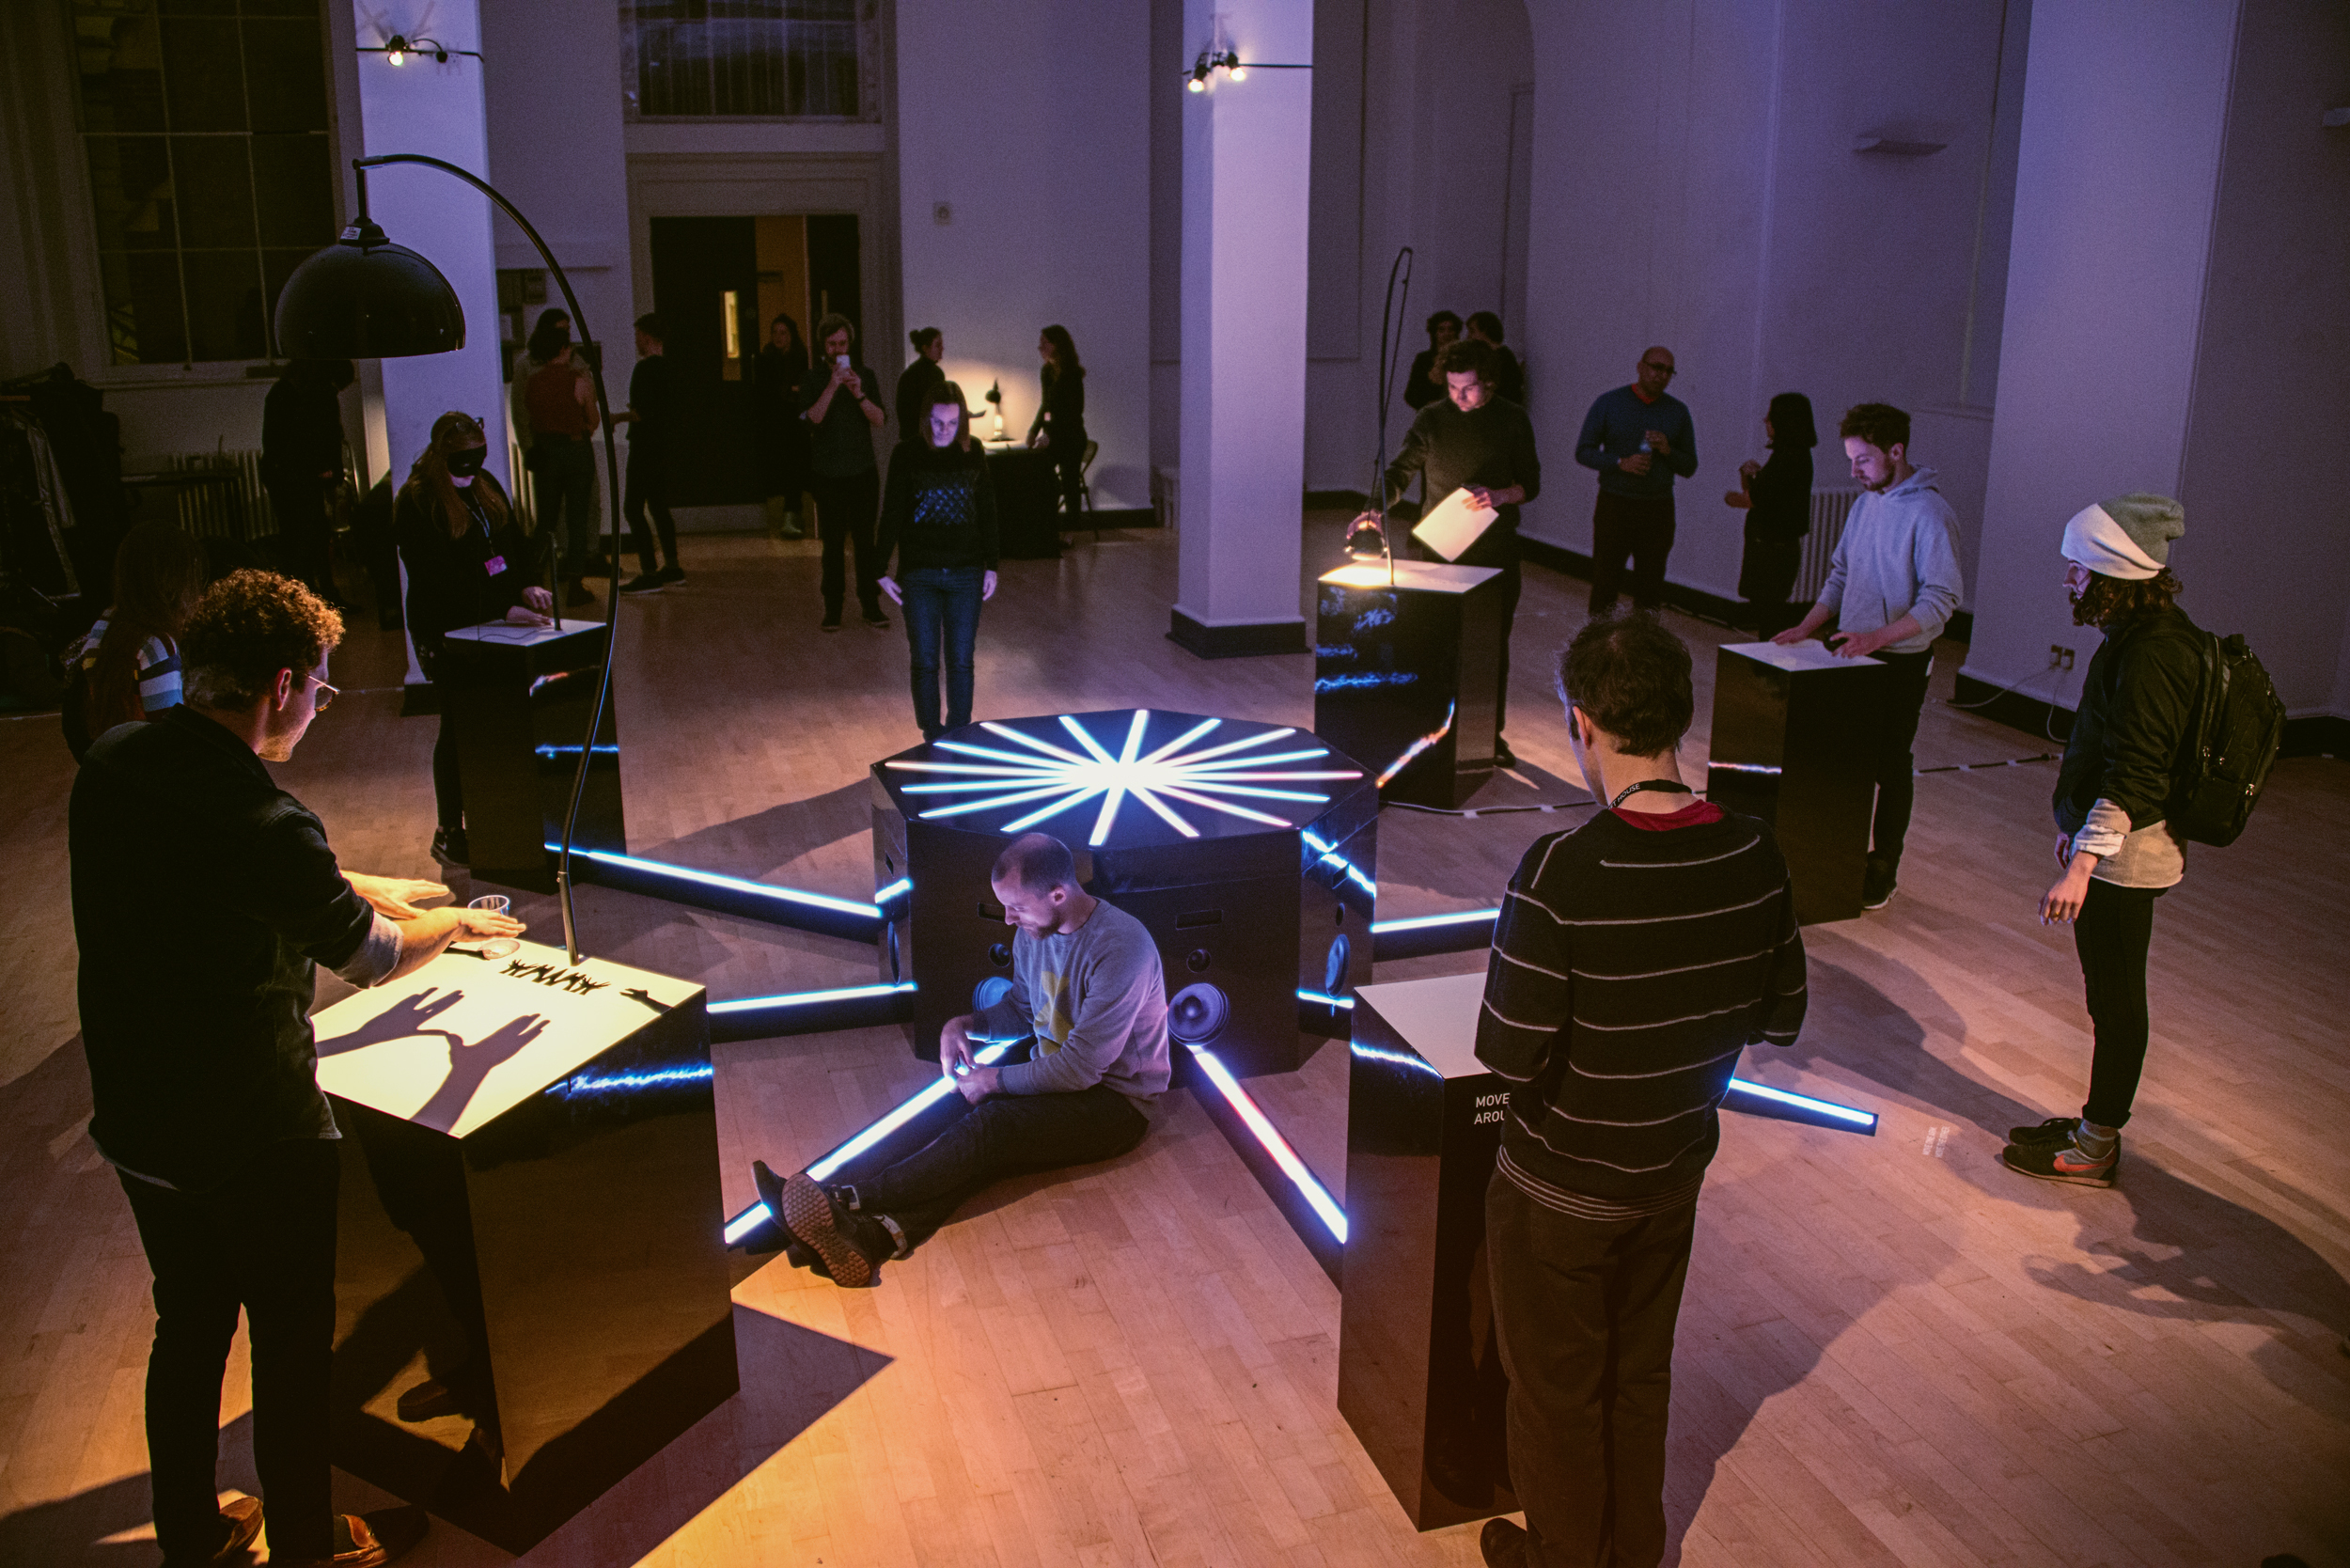 Participants collaborate to create music through bespoke instruments that use light, movement and touch, at the preview of Cave of Sounds at Music Hackspace, Somerset House Studios, Jan 2018. Photo: Suzi Corker